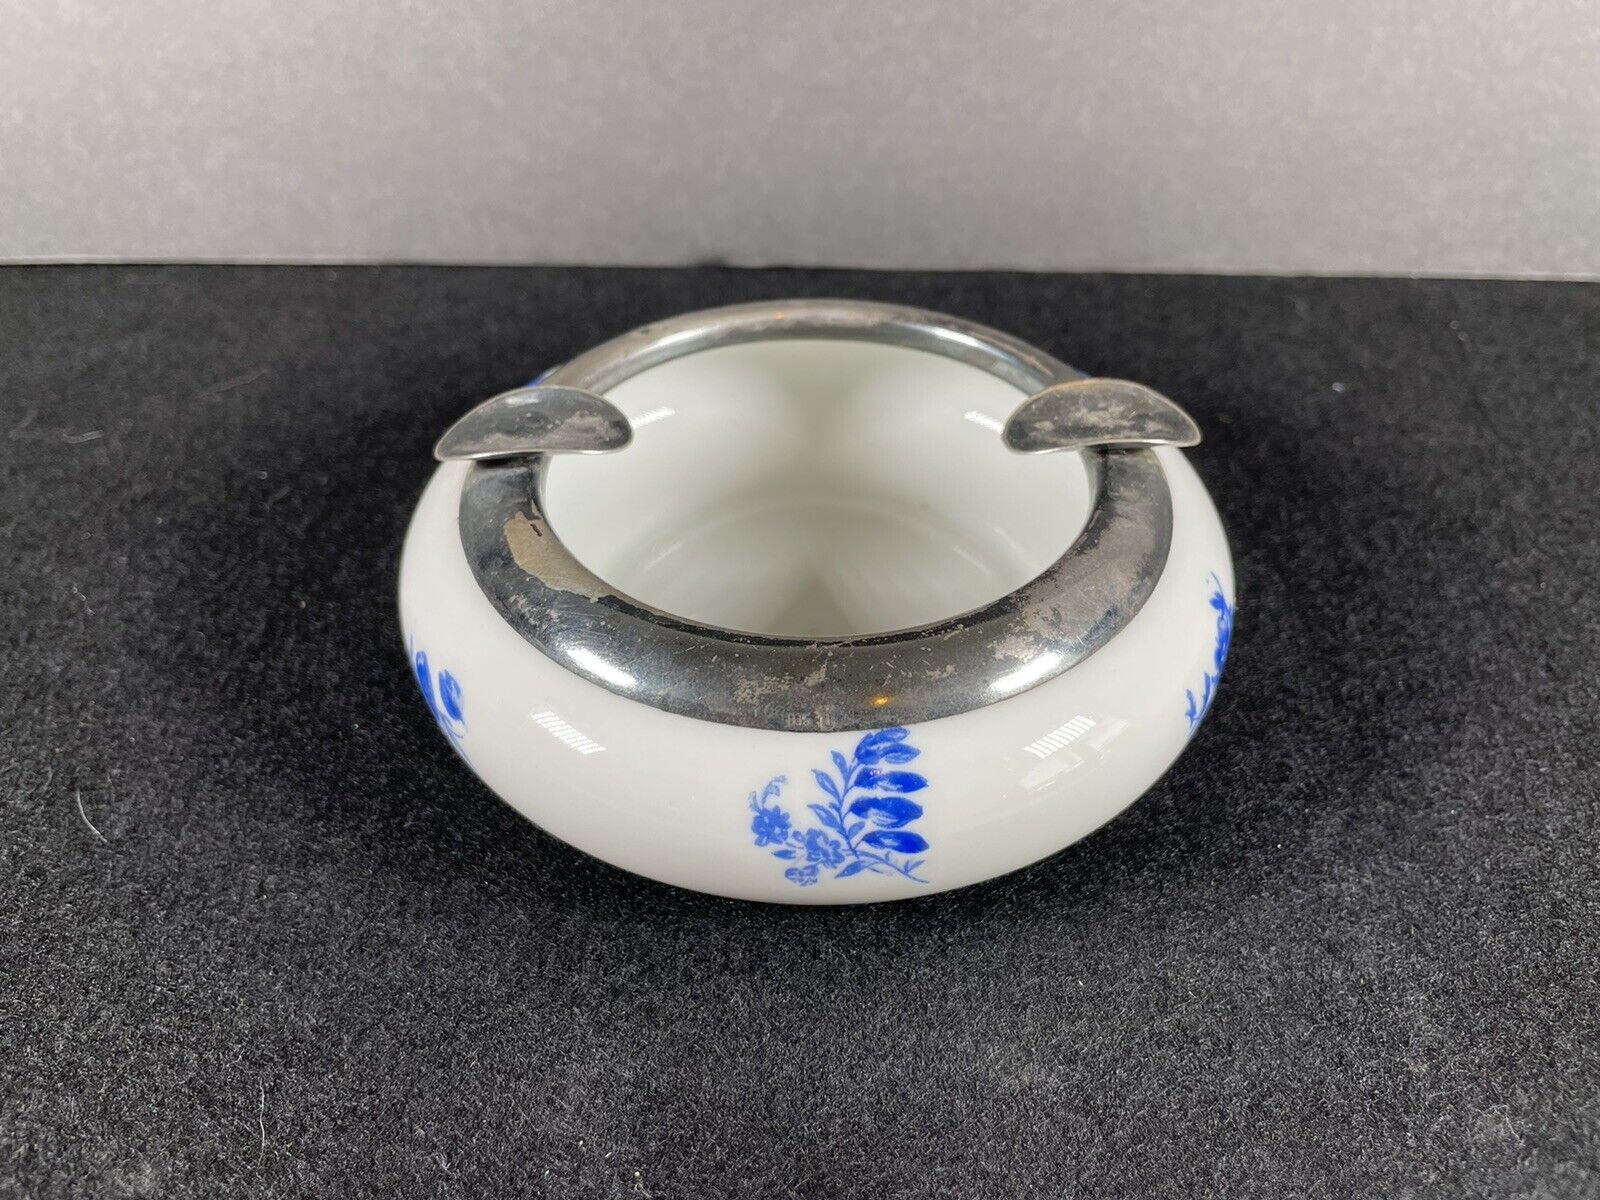 Vintage Thomas Germany Ashtray White With Blue Florals Silver Color Rim